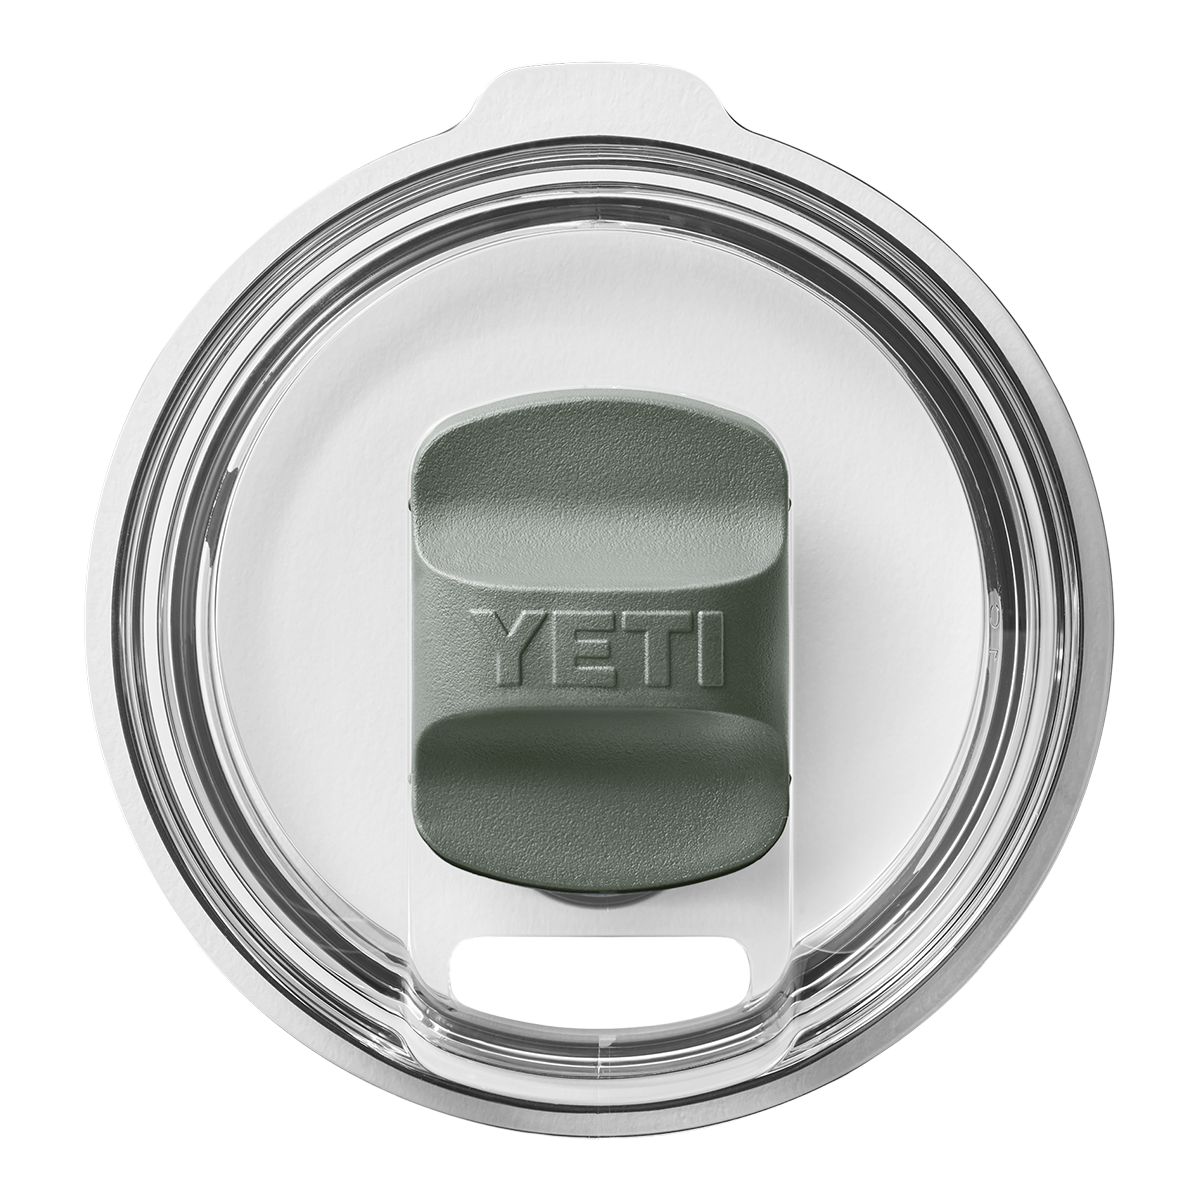 YETI MagSlider Pack, Grey Blue and Purple